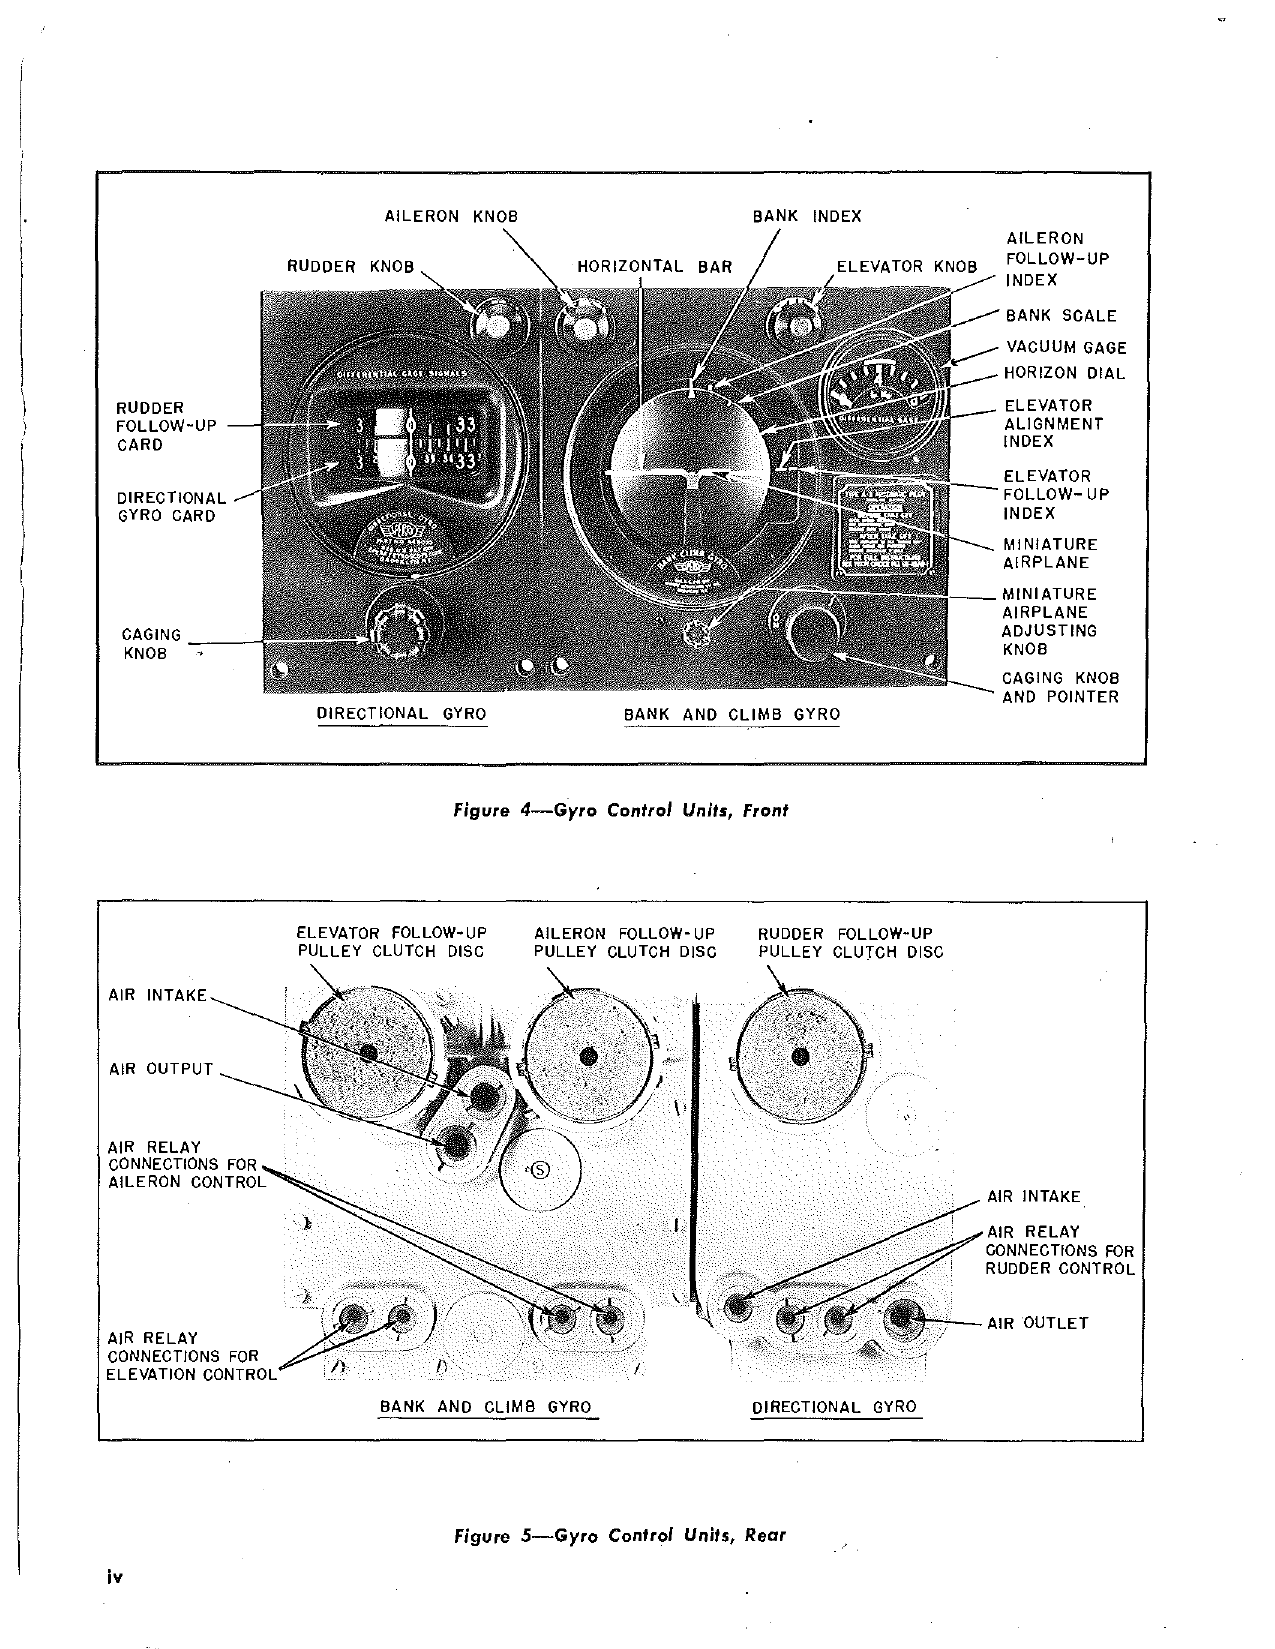 Sample page 5 from AirCorps Library document: Sperry Automatic Pilot Instruction for S-3 and A-3